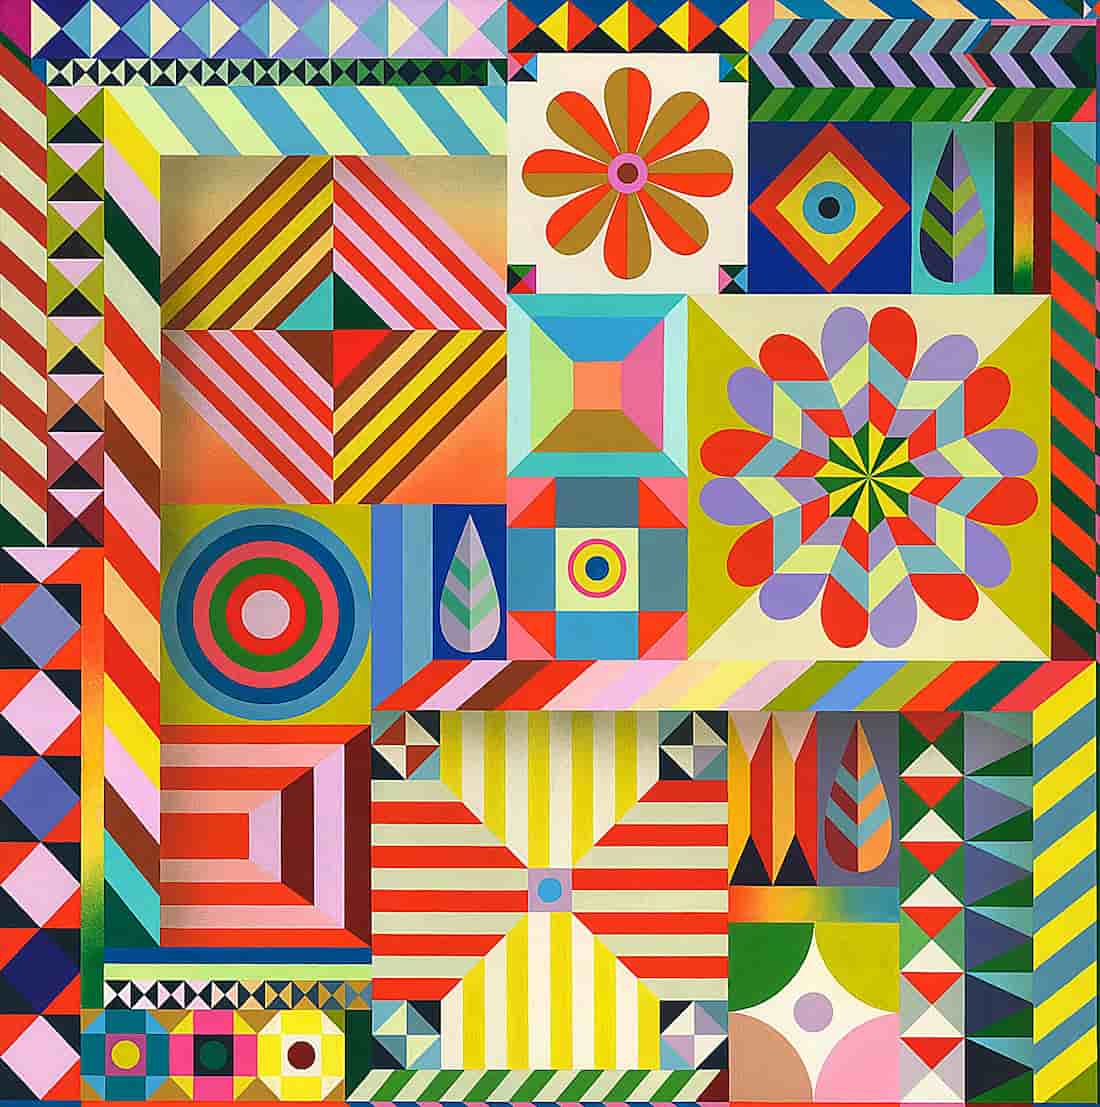 Kaleidoscopic Paintings by Sarah Helen More Pulse with Vibrant Energy—Textile design and the visual language of quilting shine through in Sarah Helen More’s paintings.